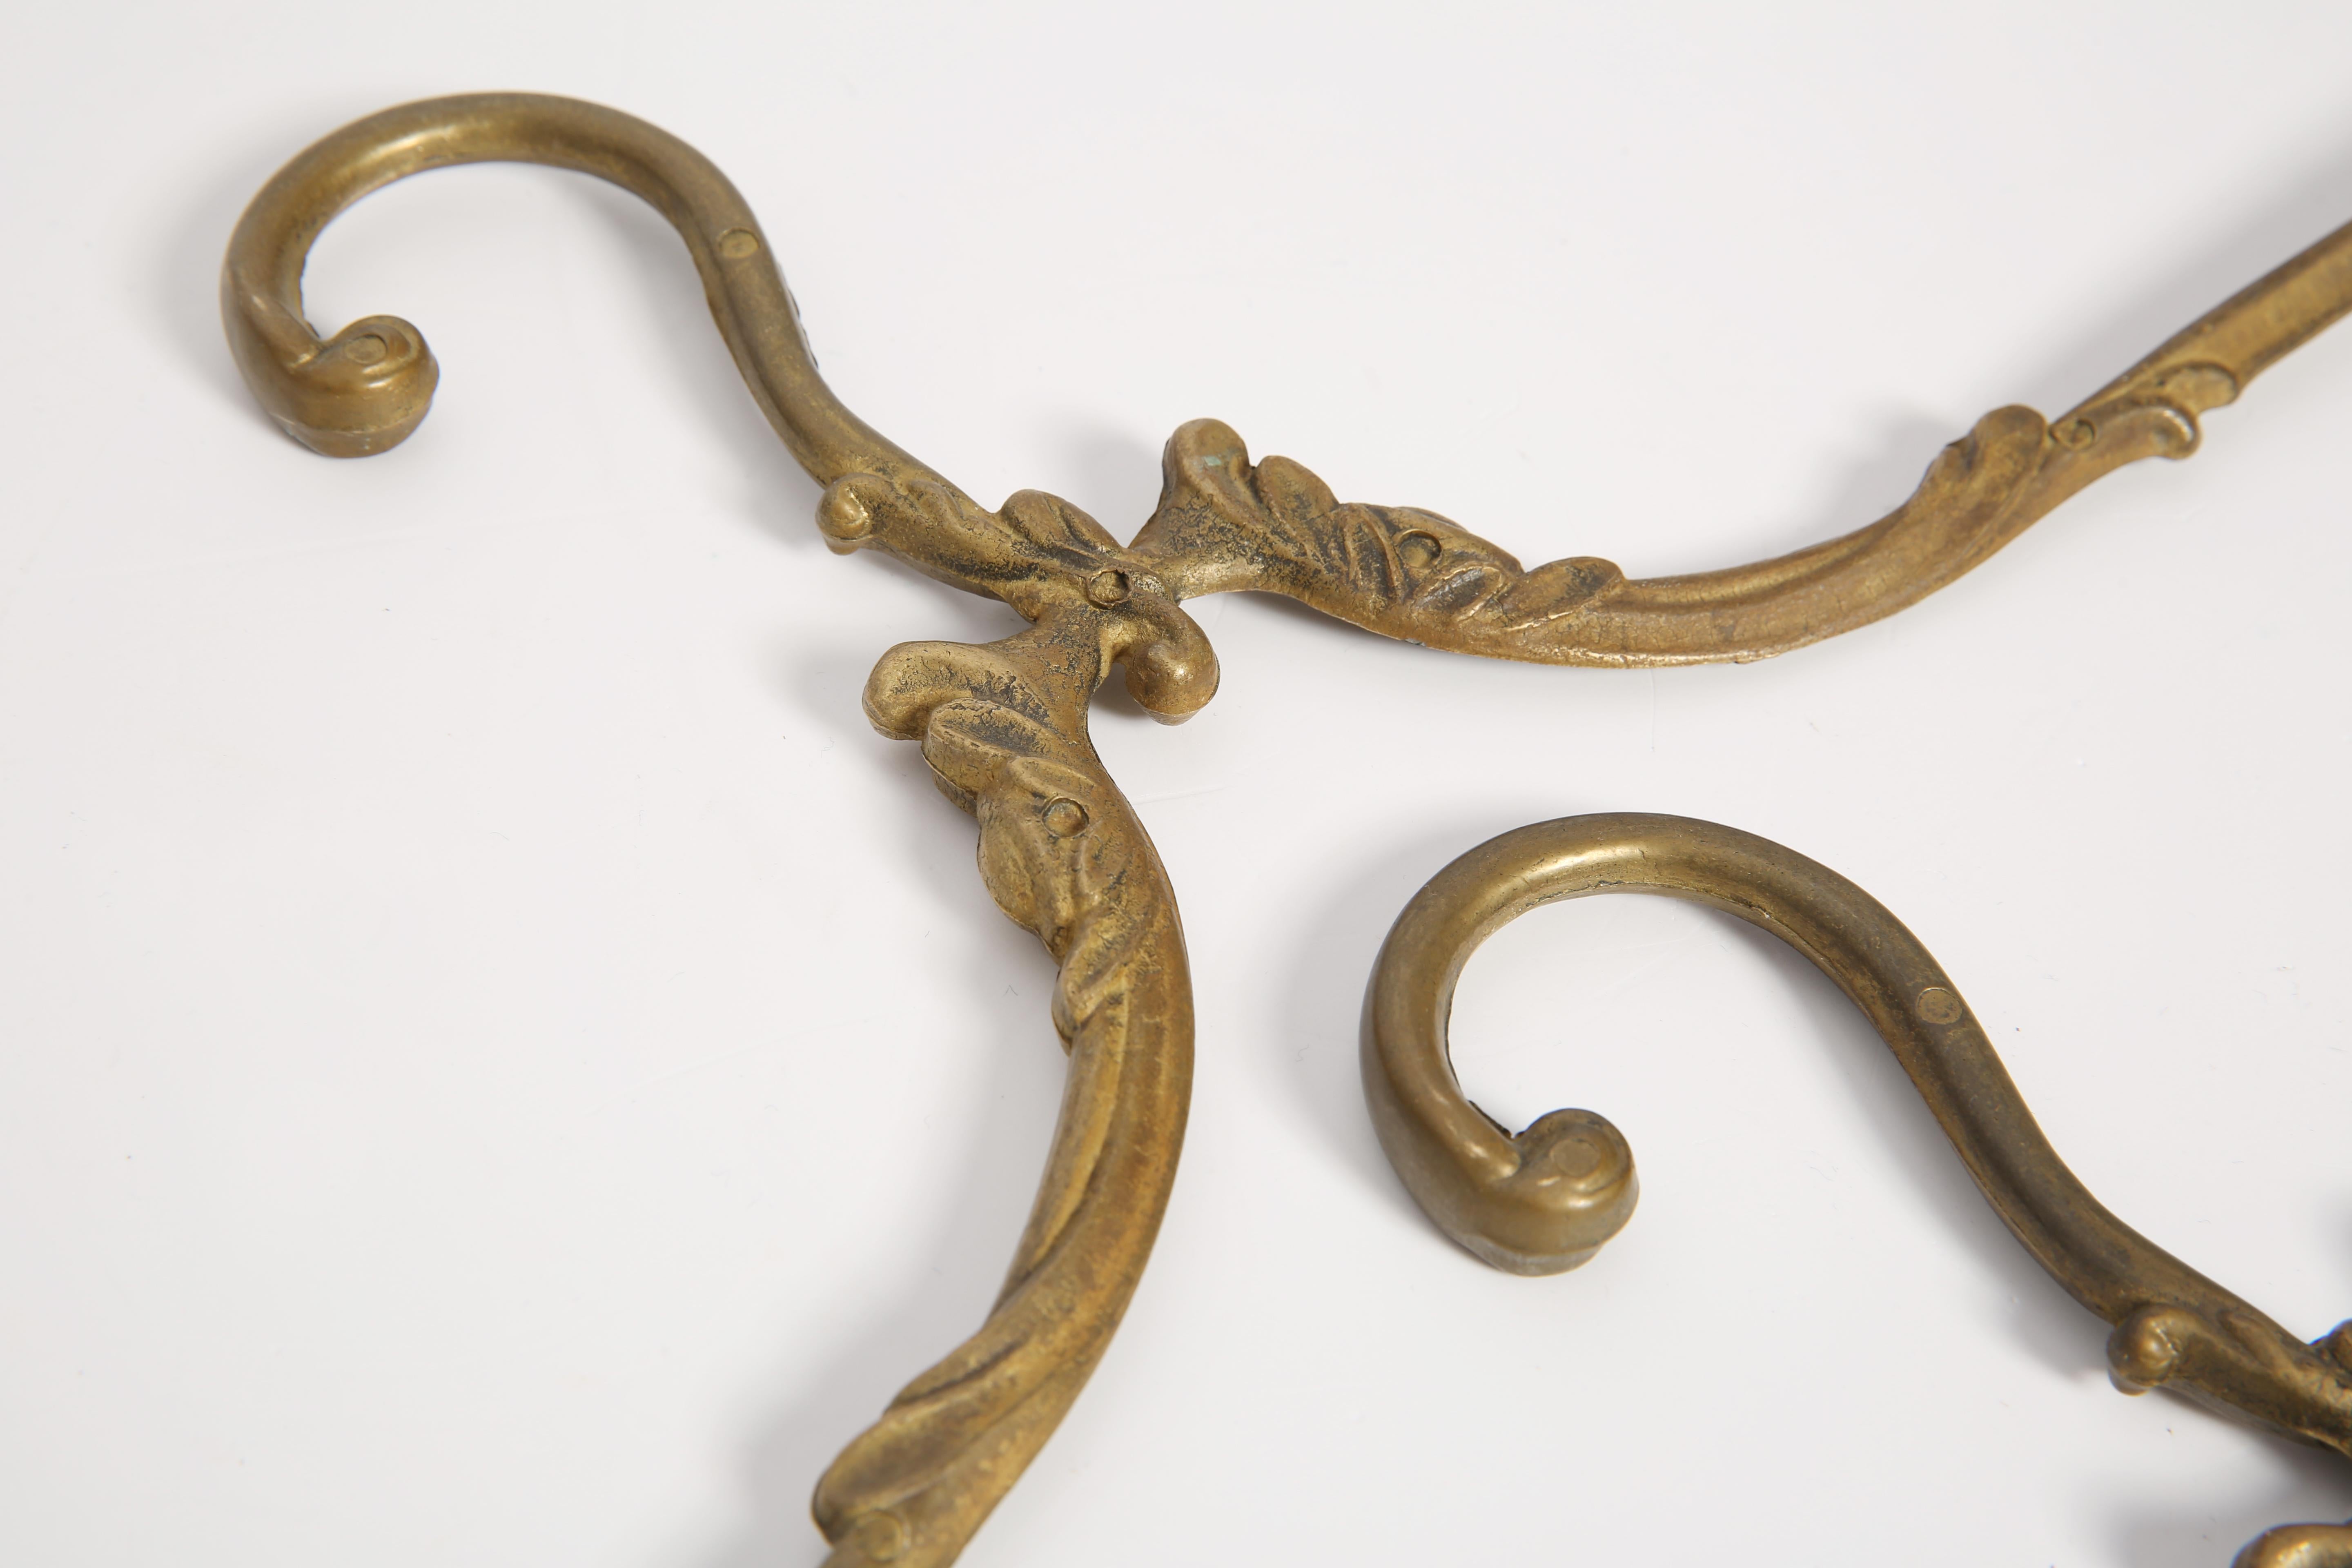 Painted Pair of Mid Century Gold Hangers, Germany, Europe, 1960s For Sale